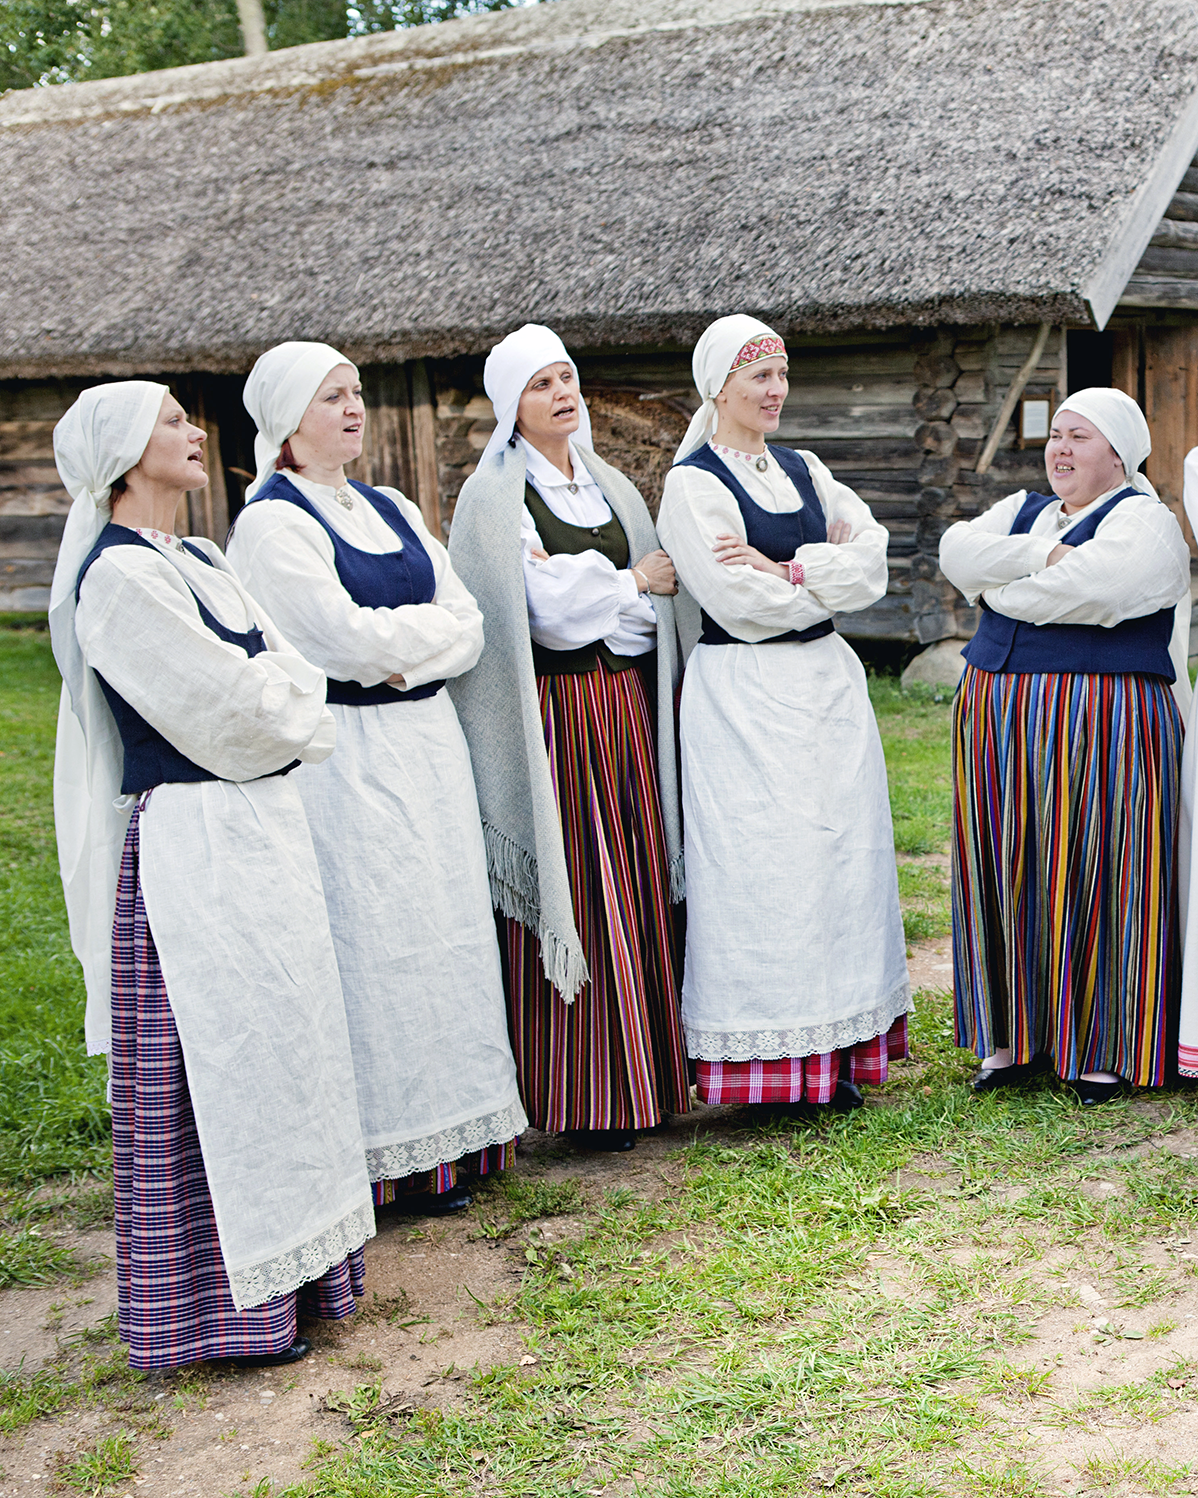 Latvian women are singing in the side by side in their traditional costumes.